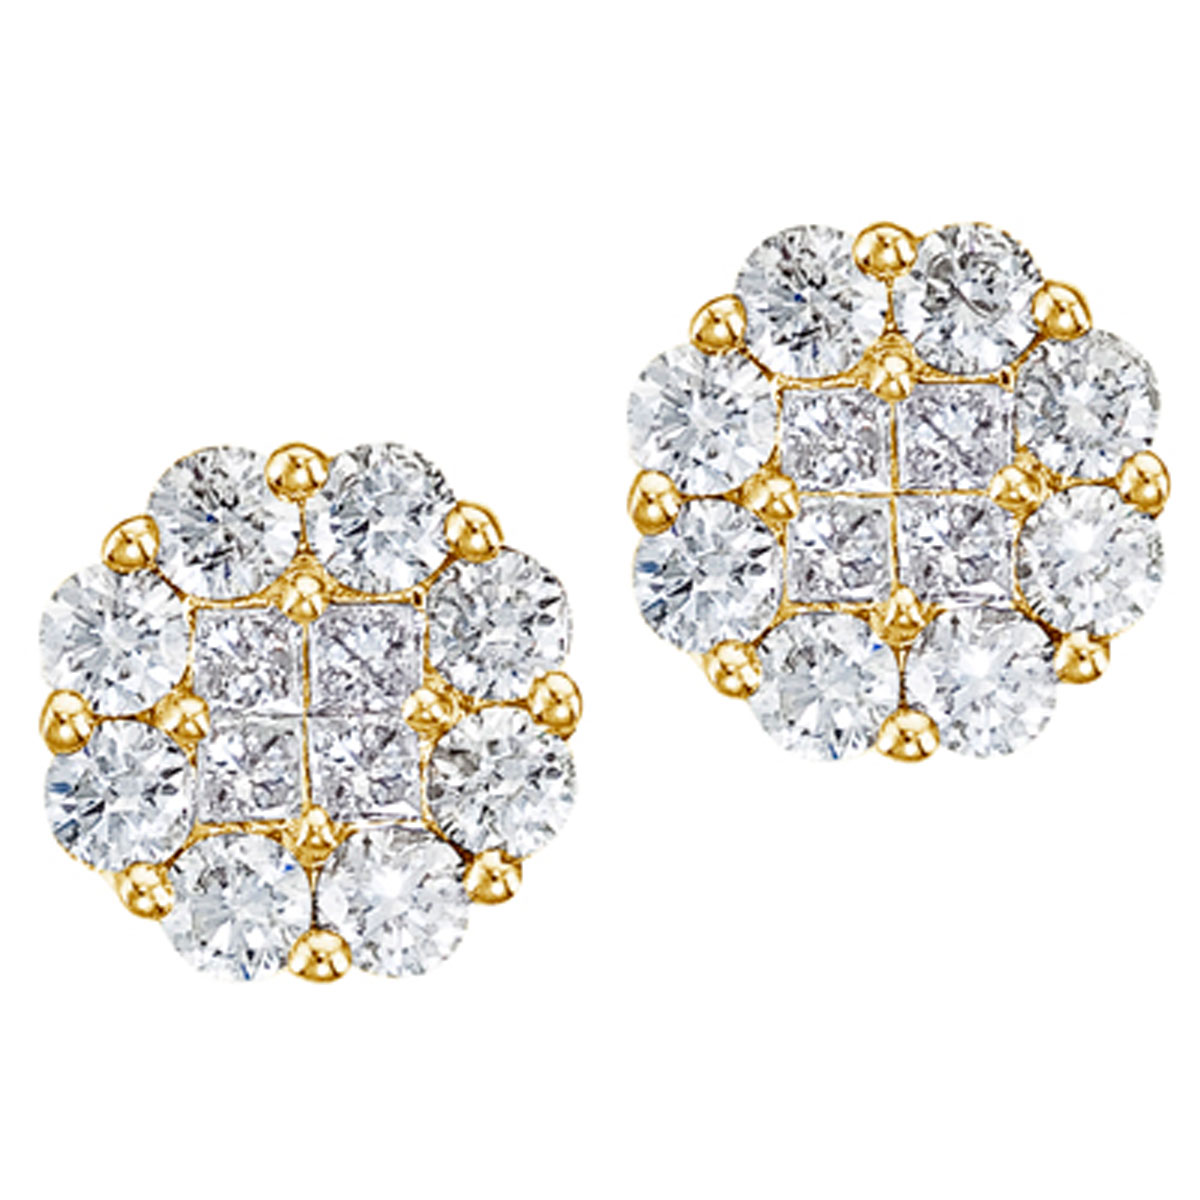 JCX2483: Gorgeous 14k yellow gold earrings with 1.50 total carats of shimmering genuine diamonds. Clustaires give all the sparkling elegence of a solitaire at a fraction of the price.